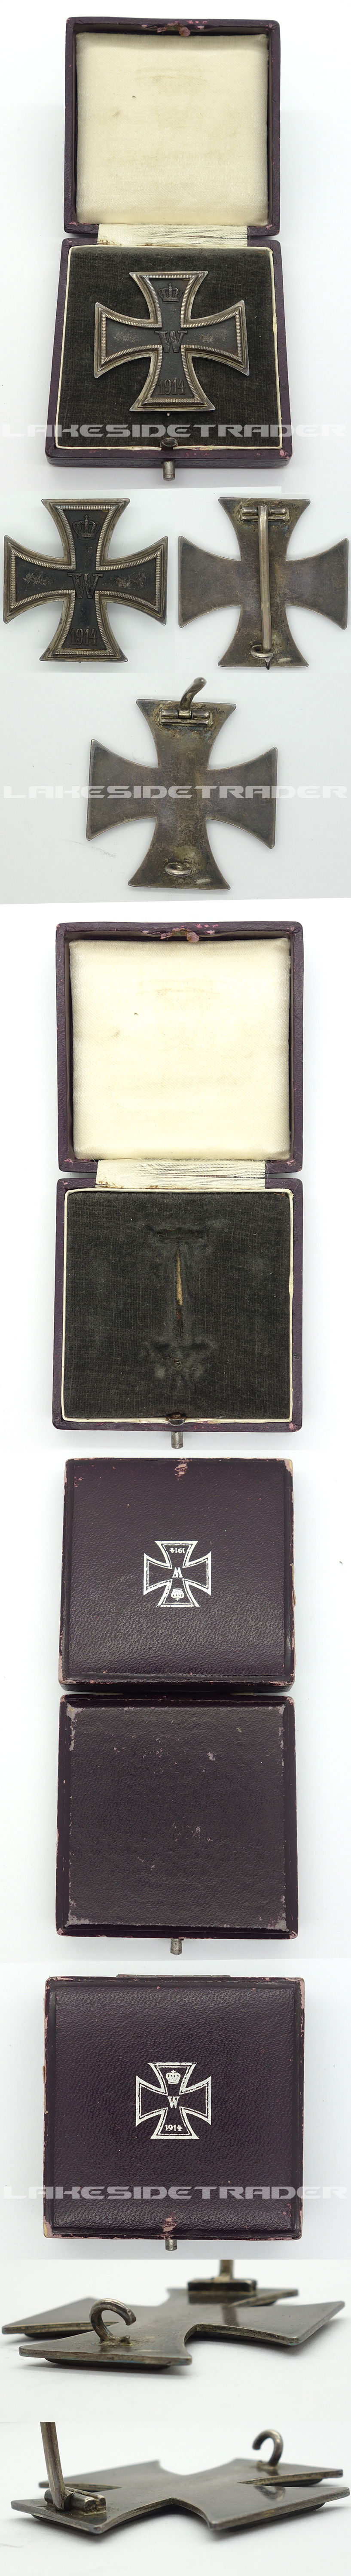 Cased Imperial 1st Class Iron Cross